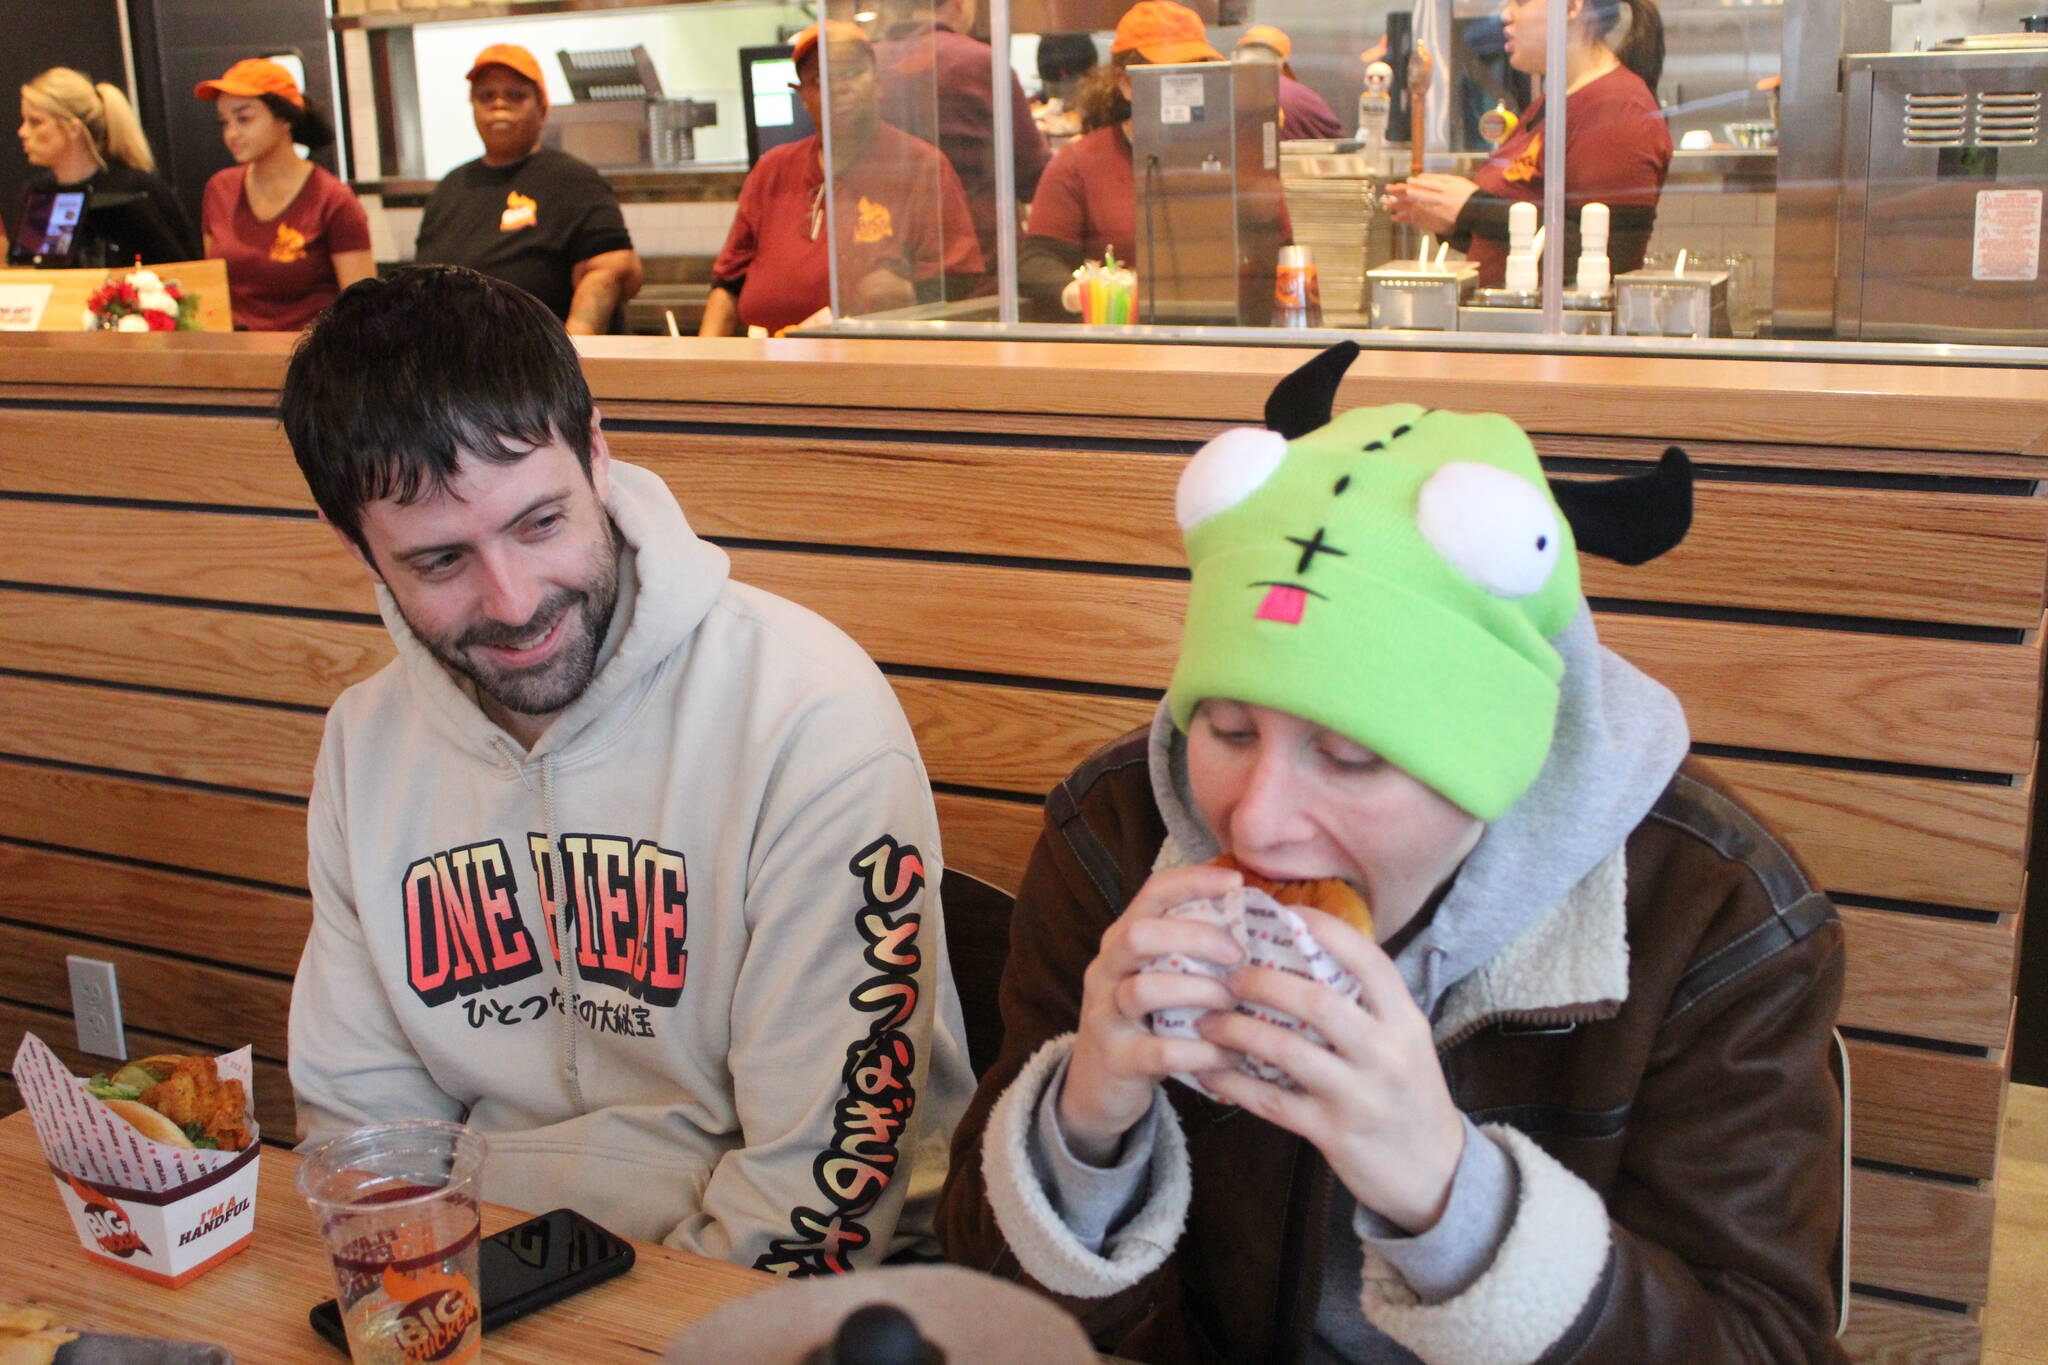 Rowan Cook, right, takes the very first bite of the first chicken sandwich ordered at the Renton Big Chicken as their partner Kyle Martin observes. Photo by Bailey Jo Josie/Sound Publishing.